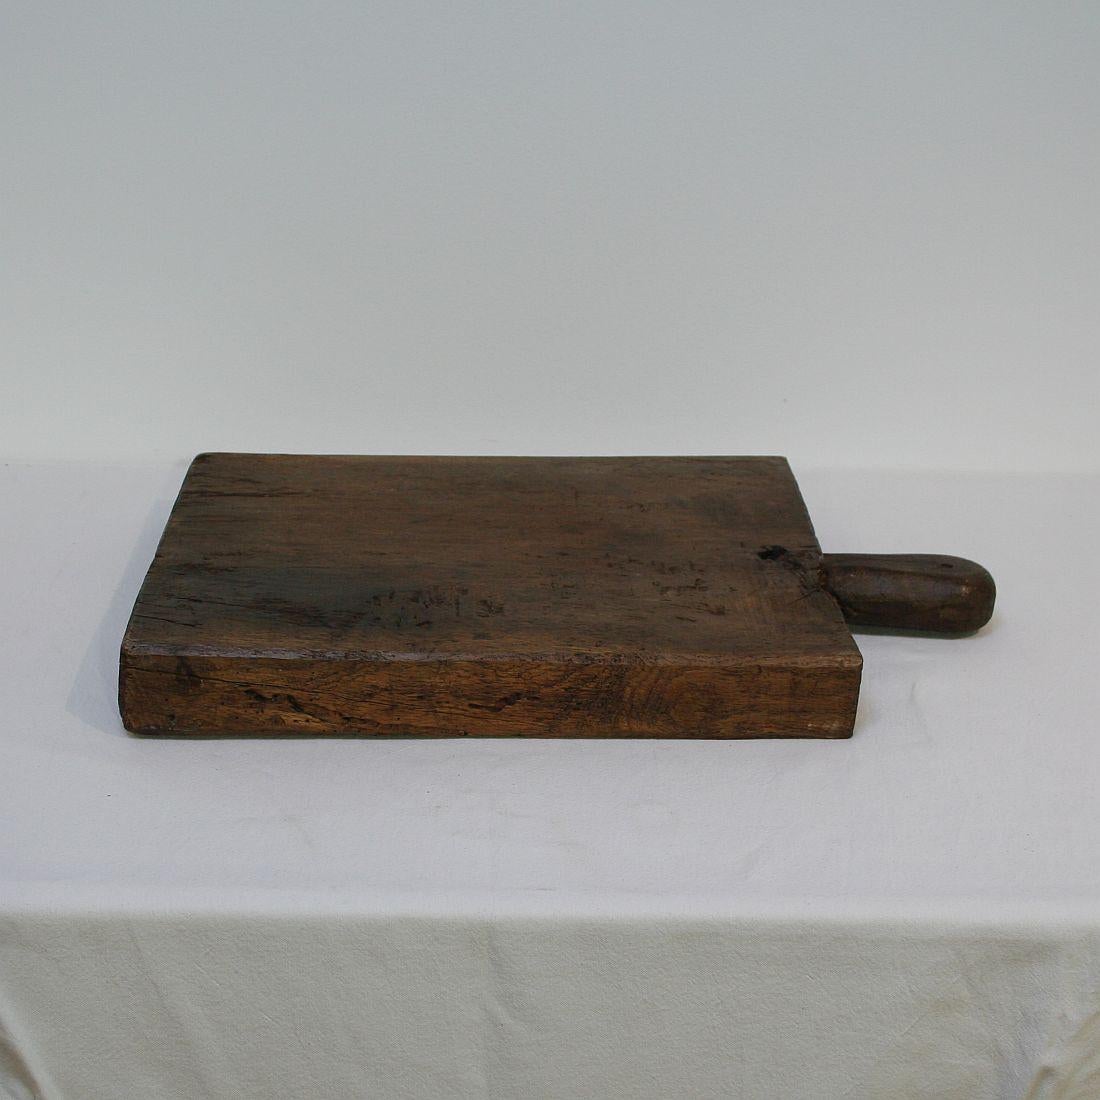 French Provincial French, 19th Century, Wooden Chopping or Cutting Board